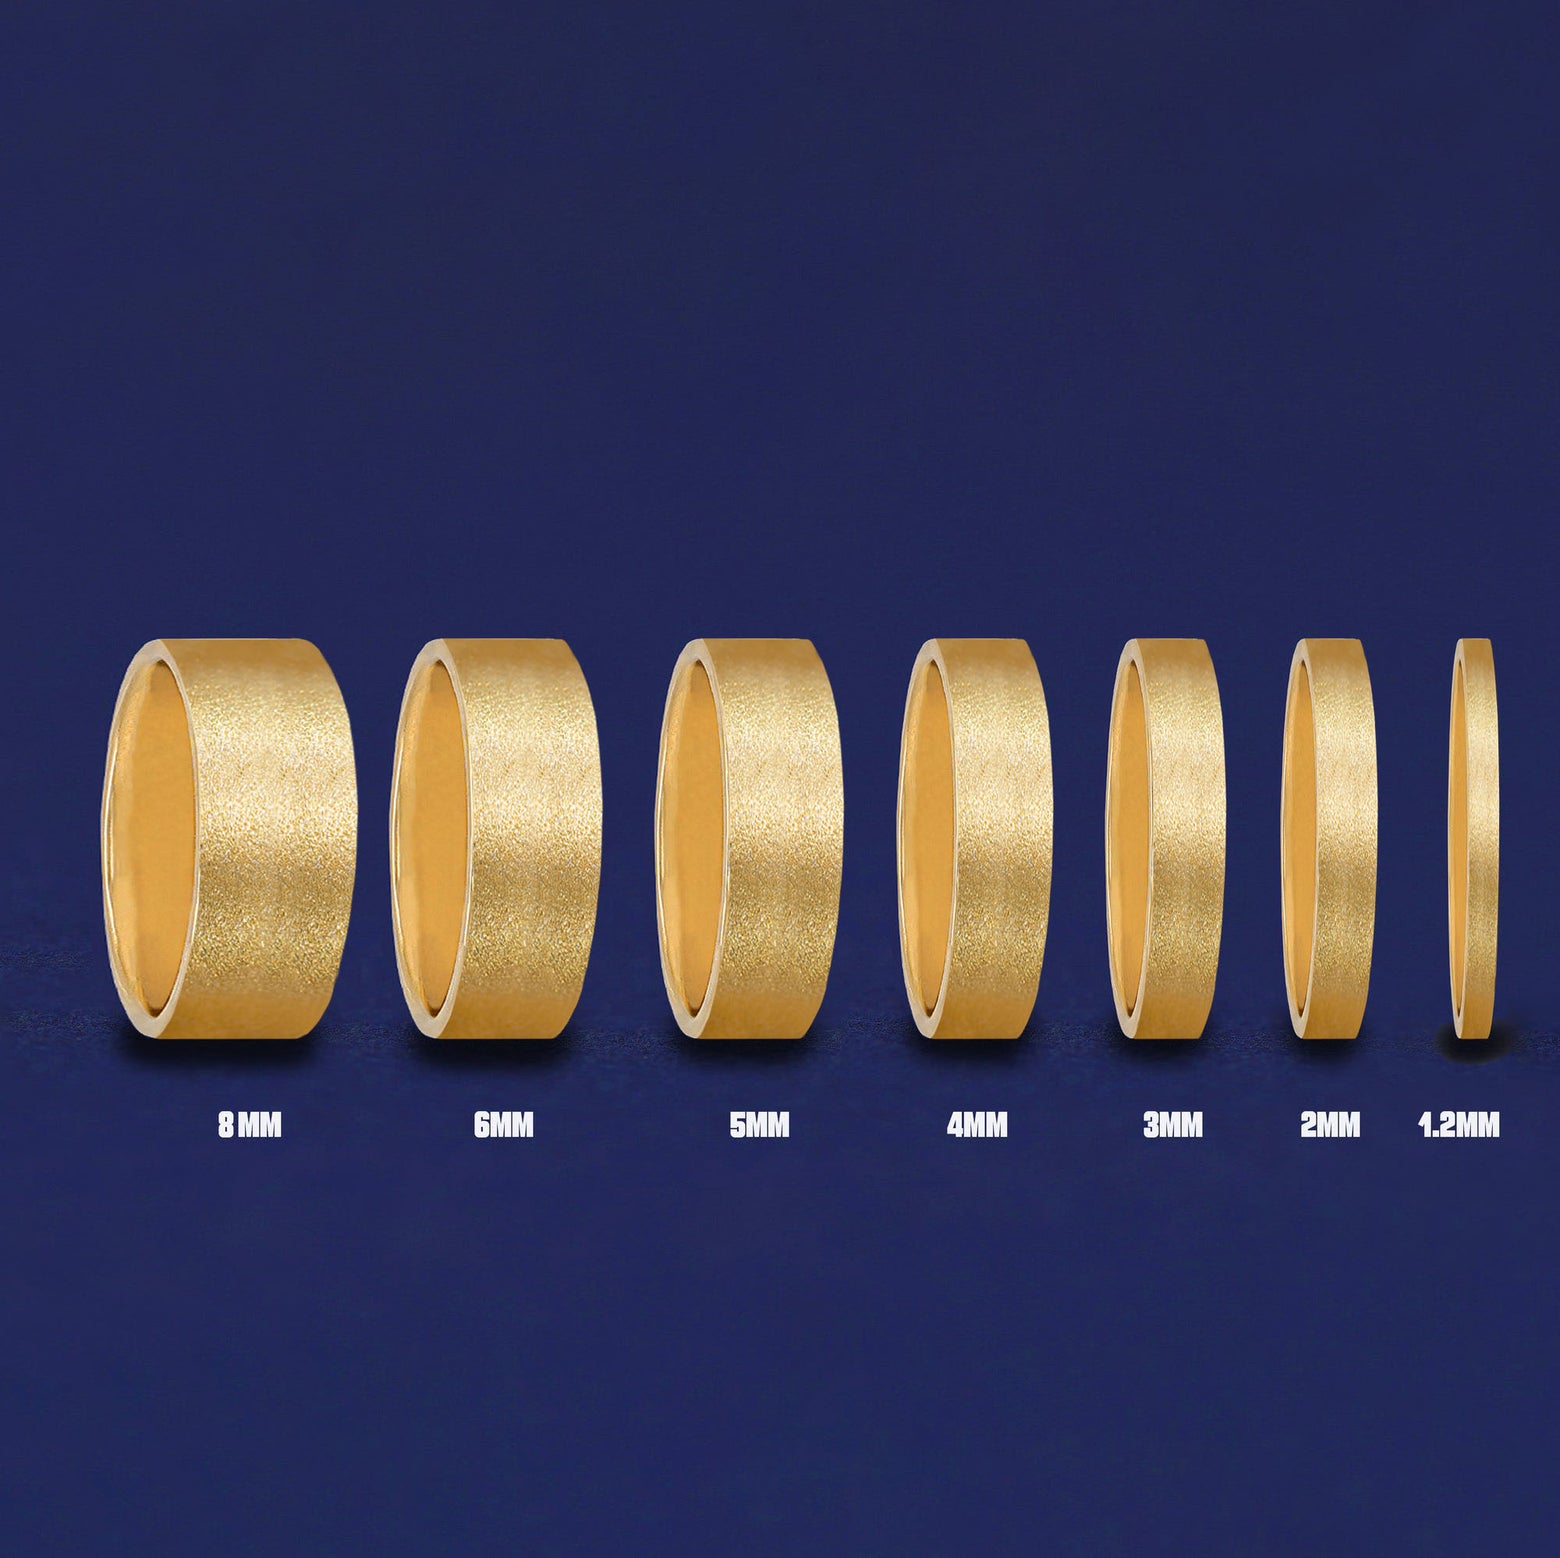 Seven versions of the Industrial Stardust Band showing the different thickness options of the ring from 8mm to 1.2mm